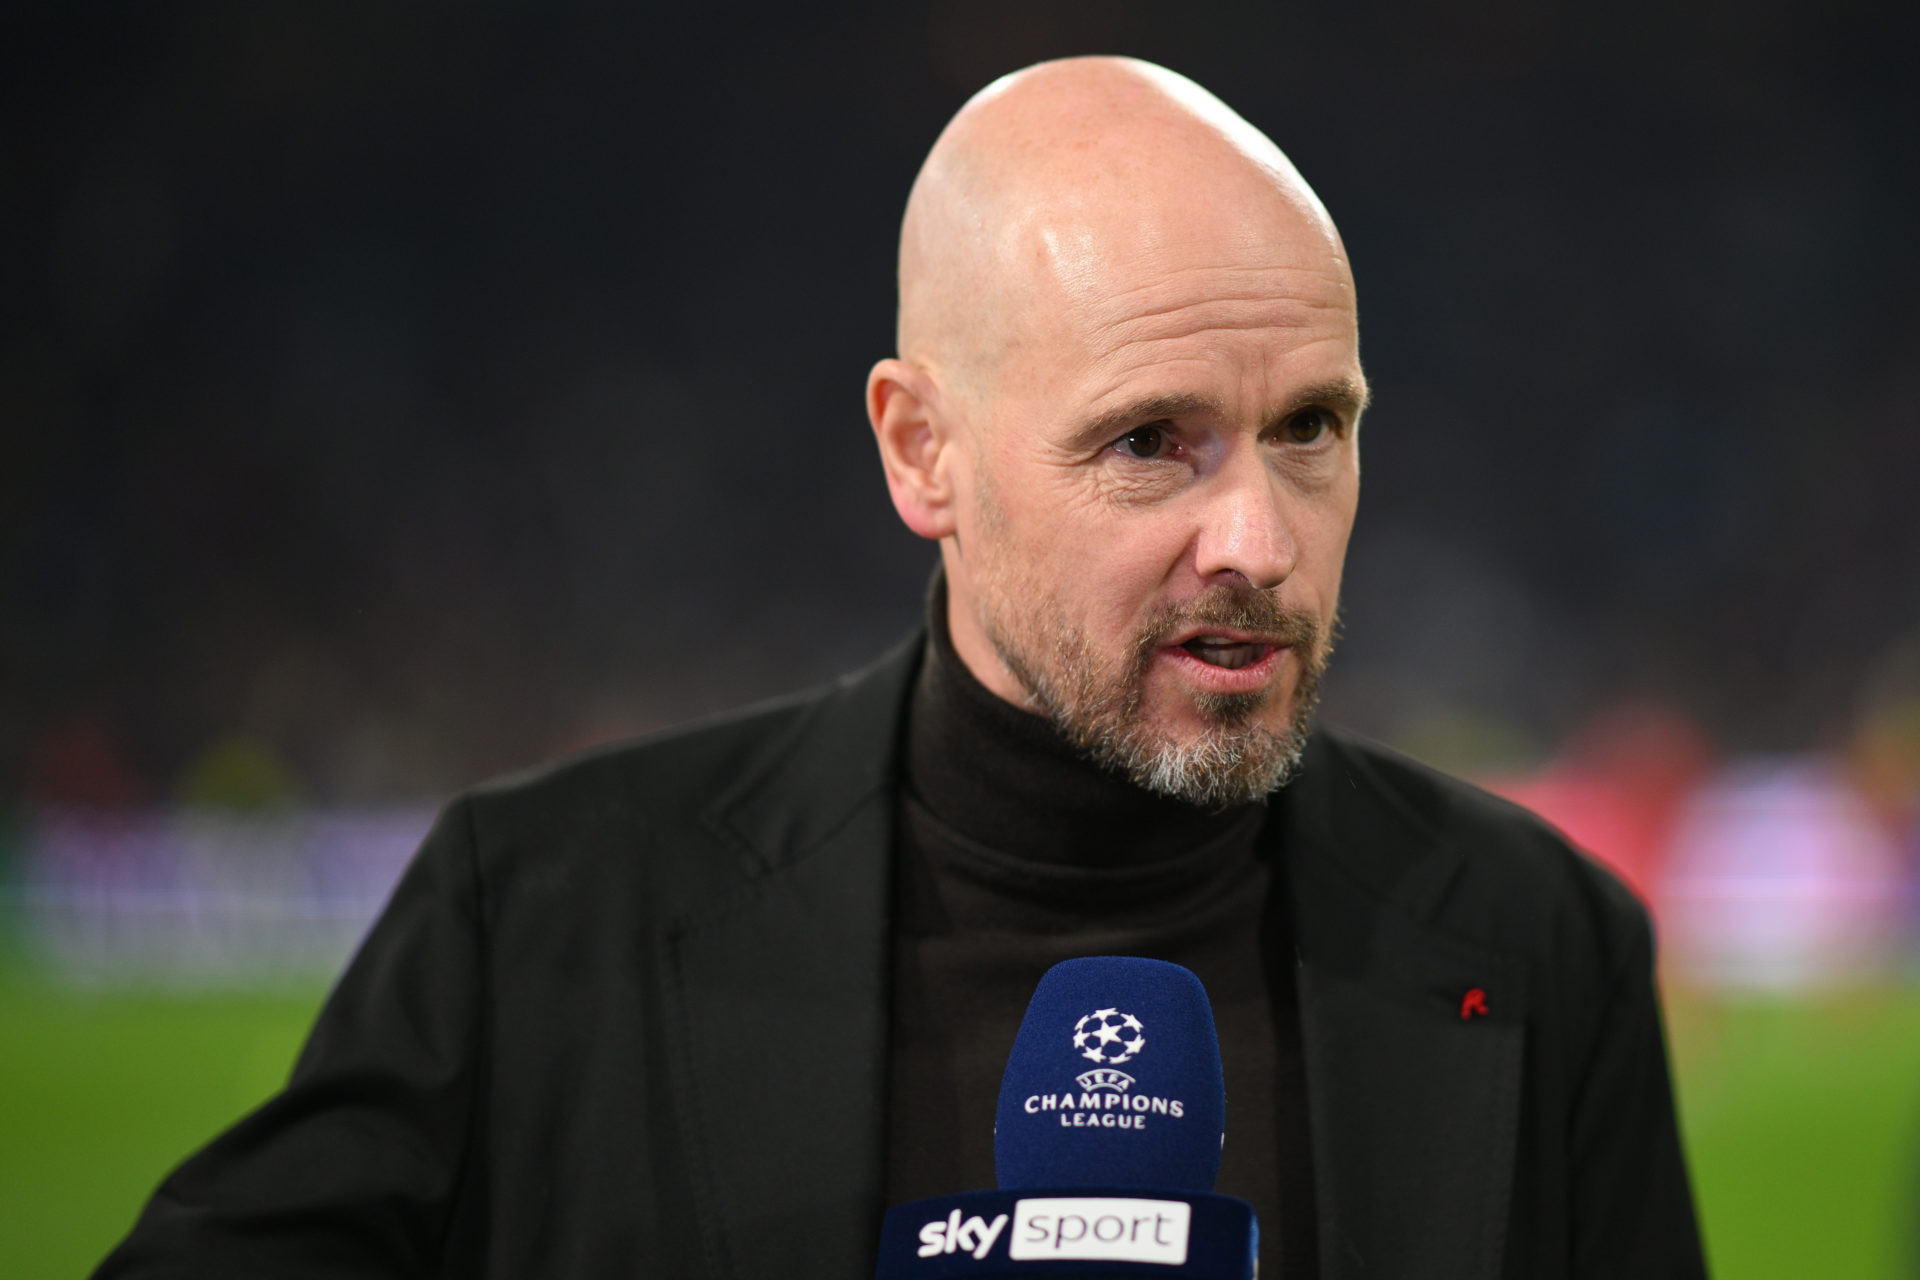 Erik ten Hag: Manchester United appoint Ajax boss as new manager